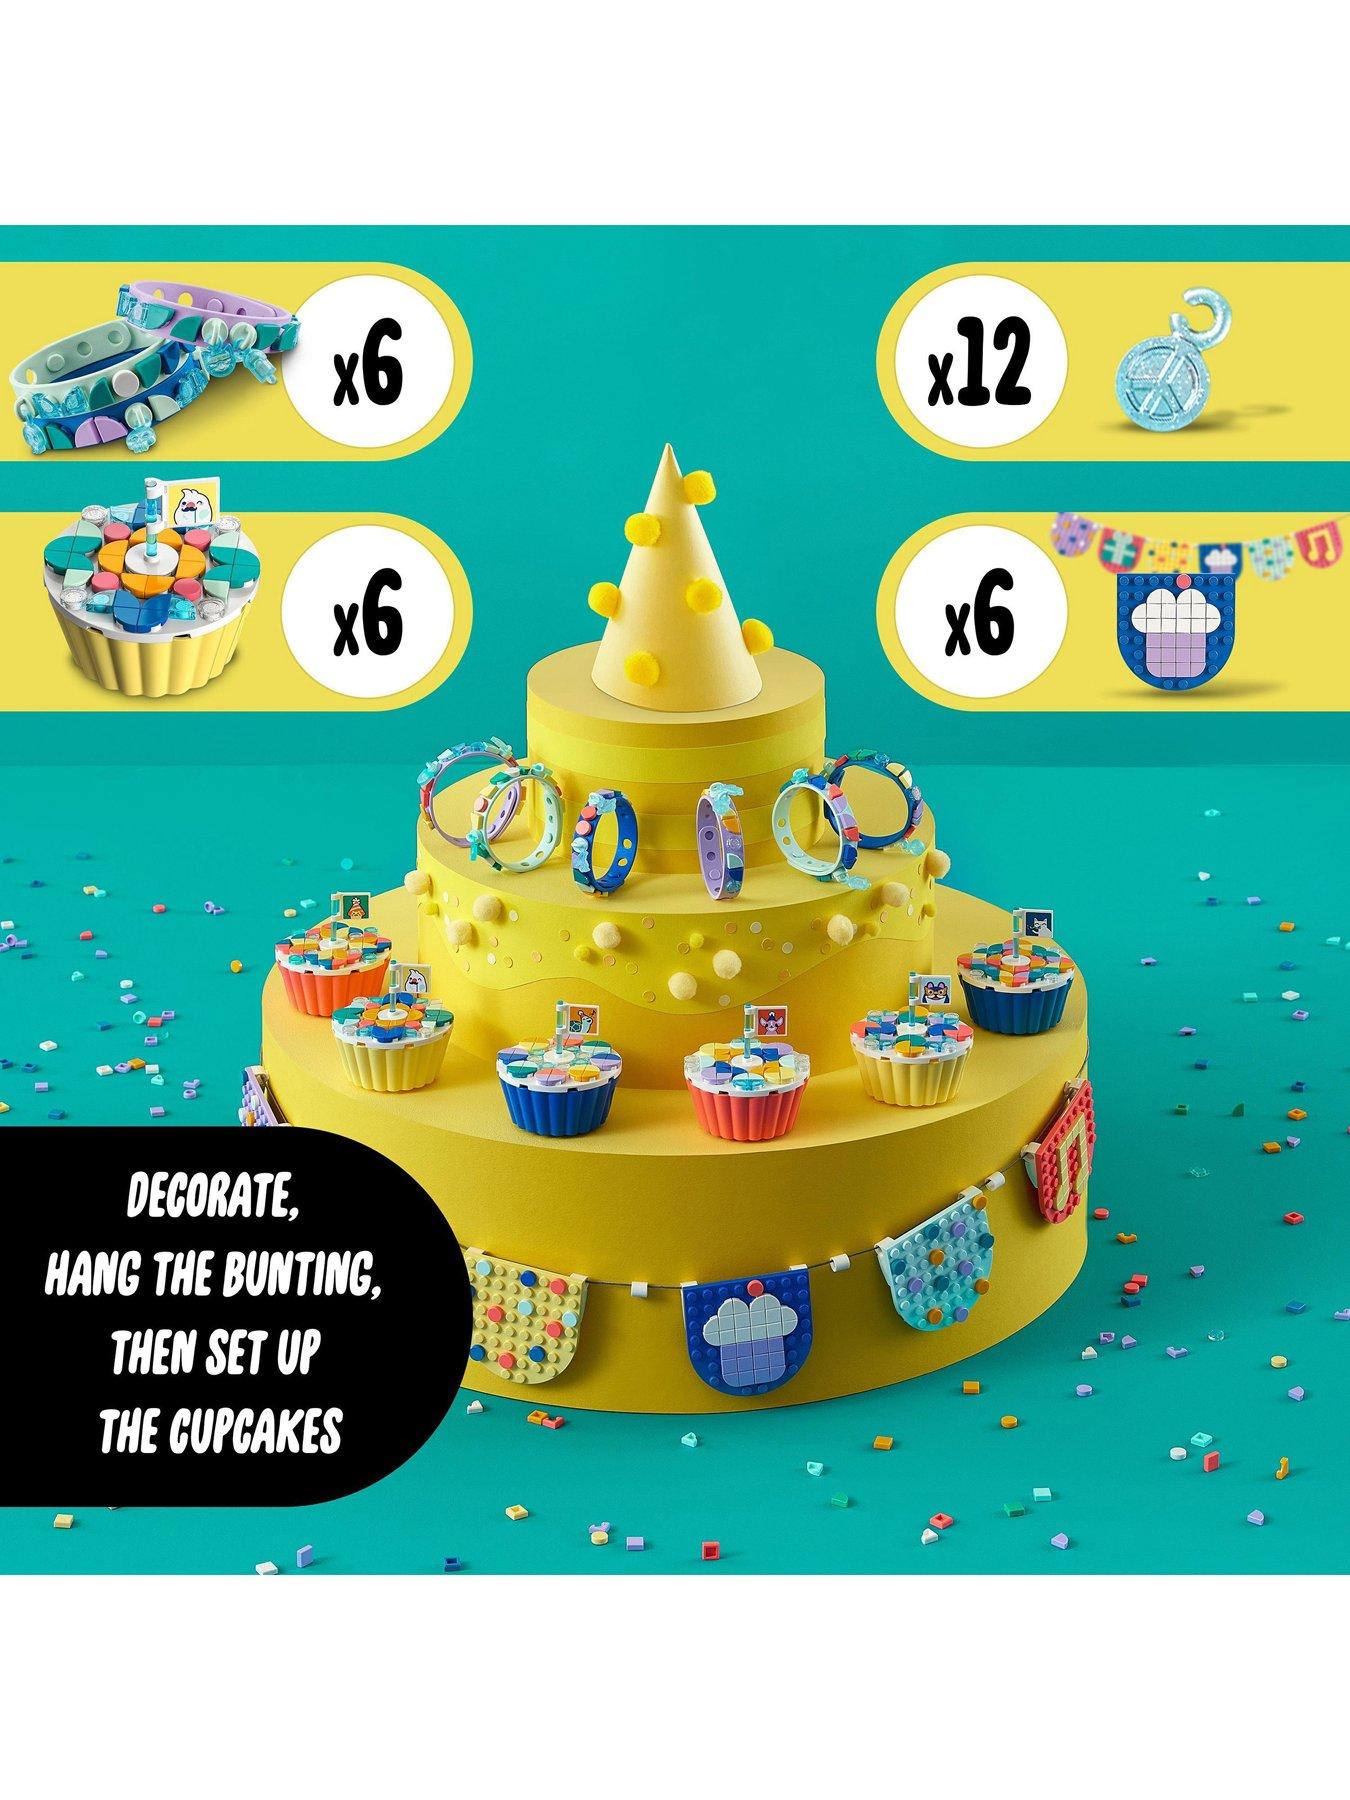 LEGO DOTS Ultimate Party Kit 41806, Arts & Crafts Birthday Party Games or  DIY Party Bag Fillers with Toy Cupcakes, Best Friend Bracelets, and  Bunting, Creative Gifts for Kids 